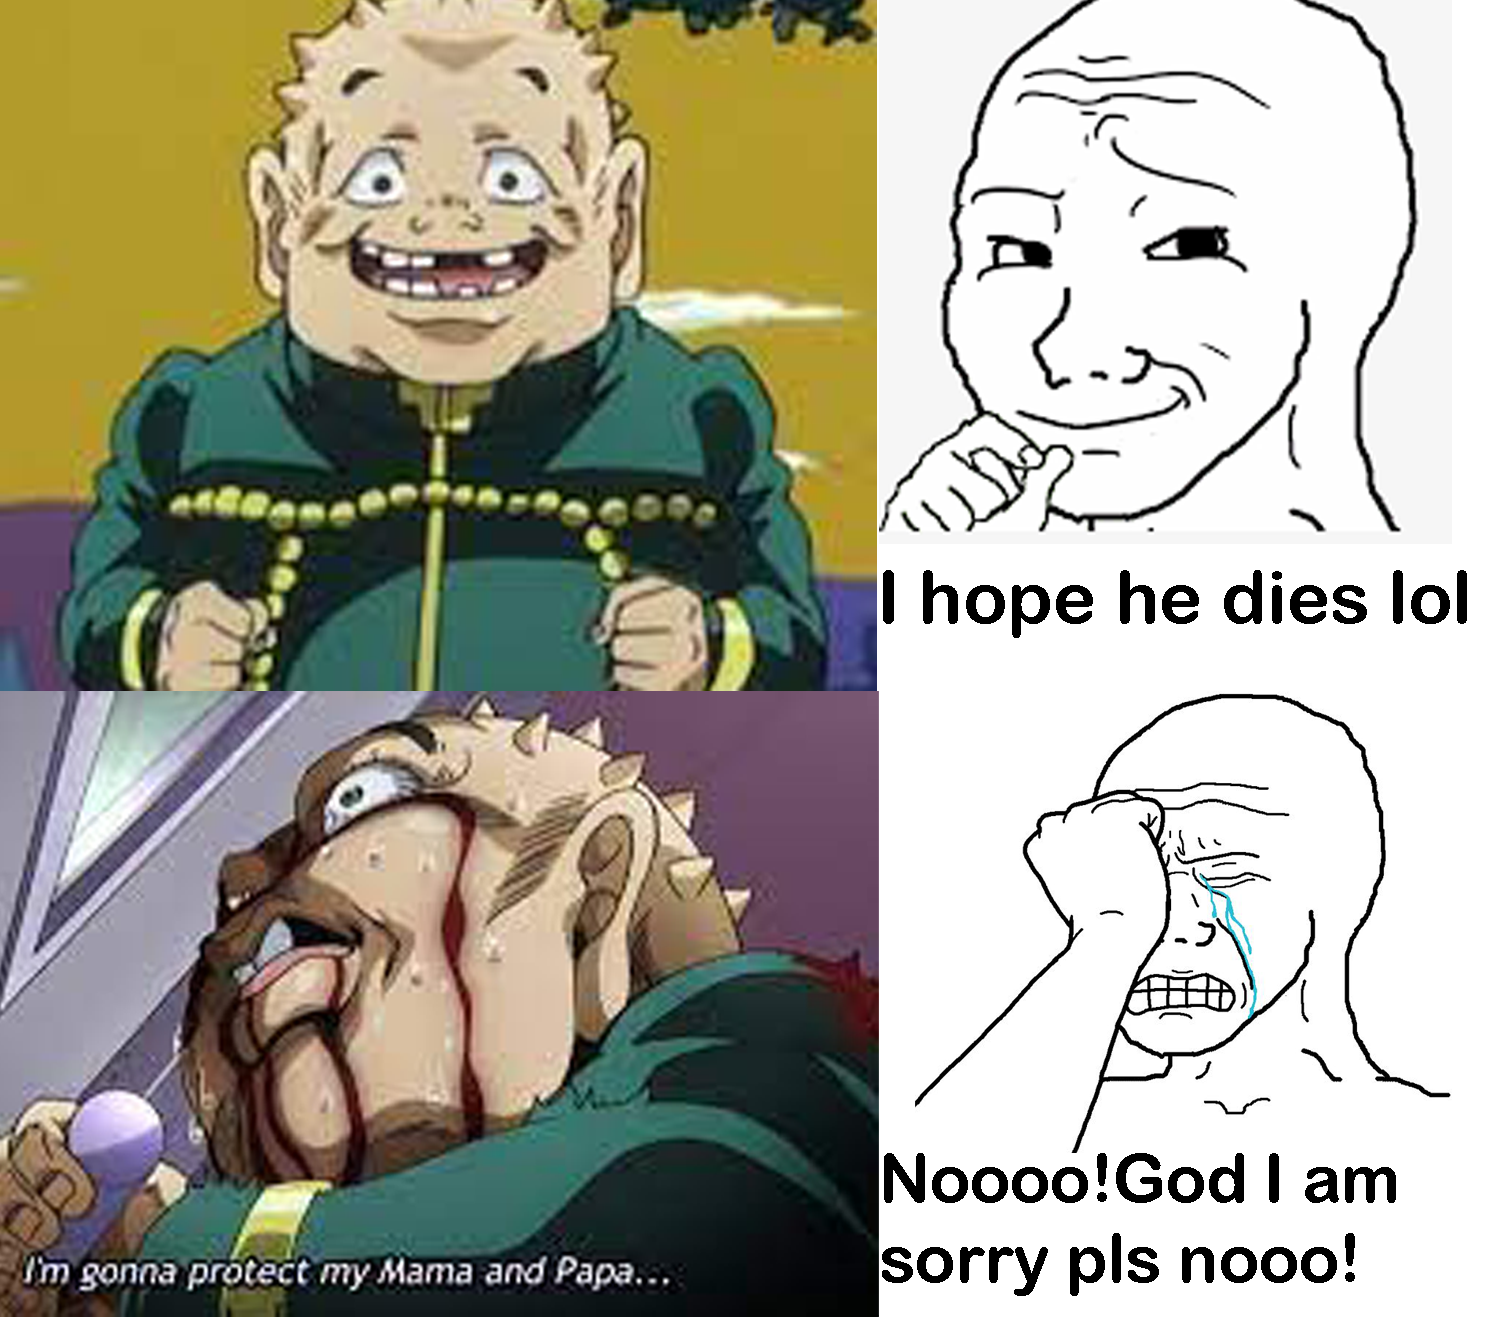 If only Mineta died in his place.....